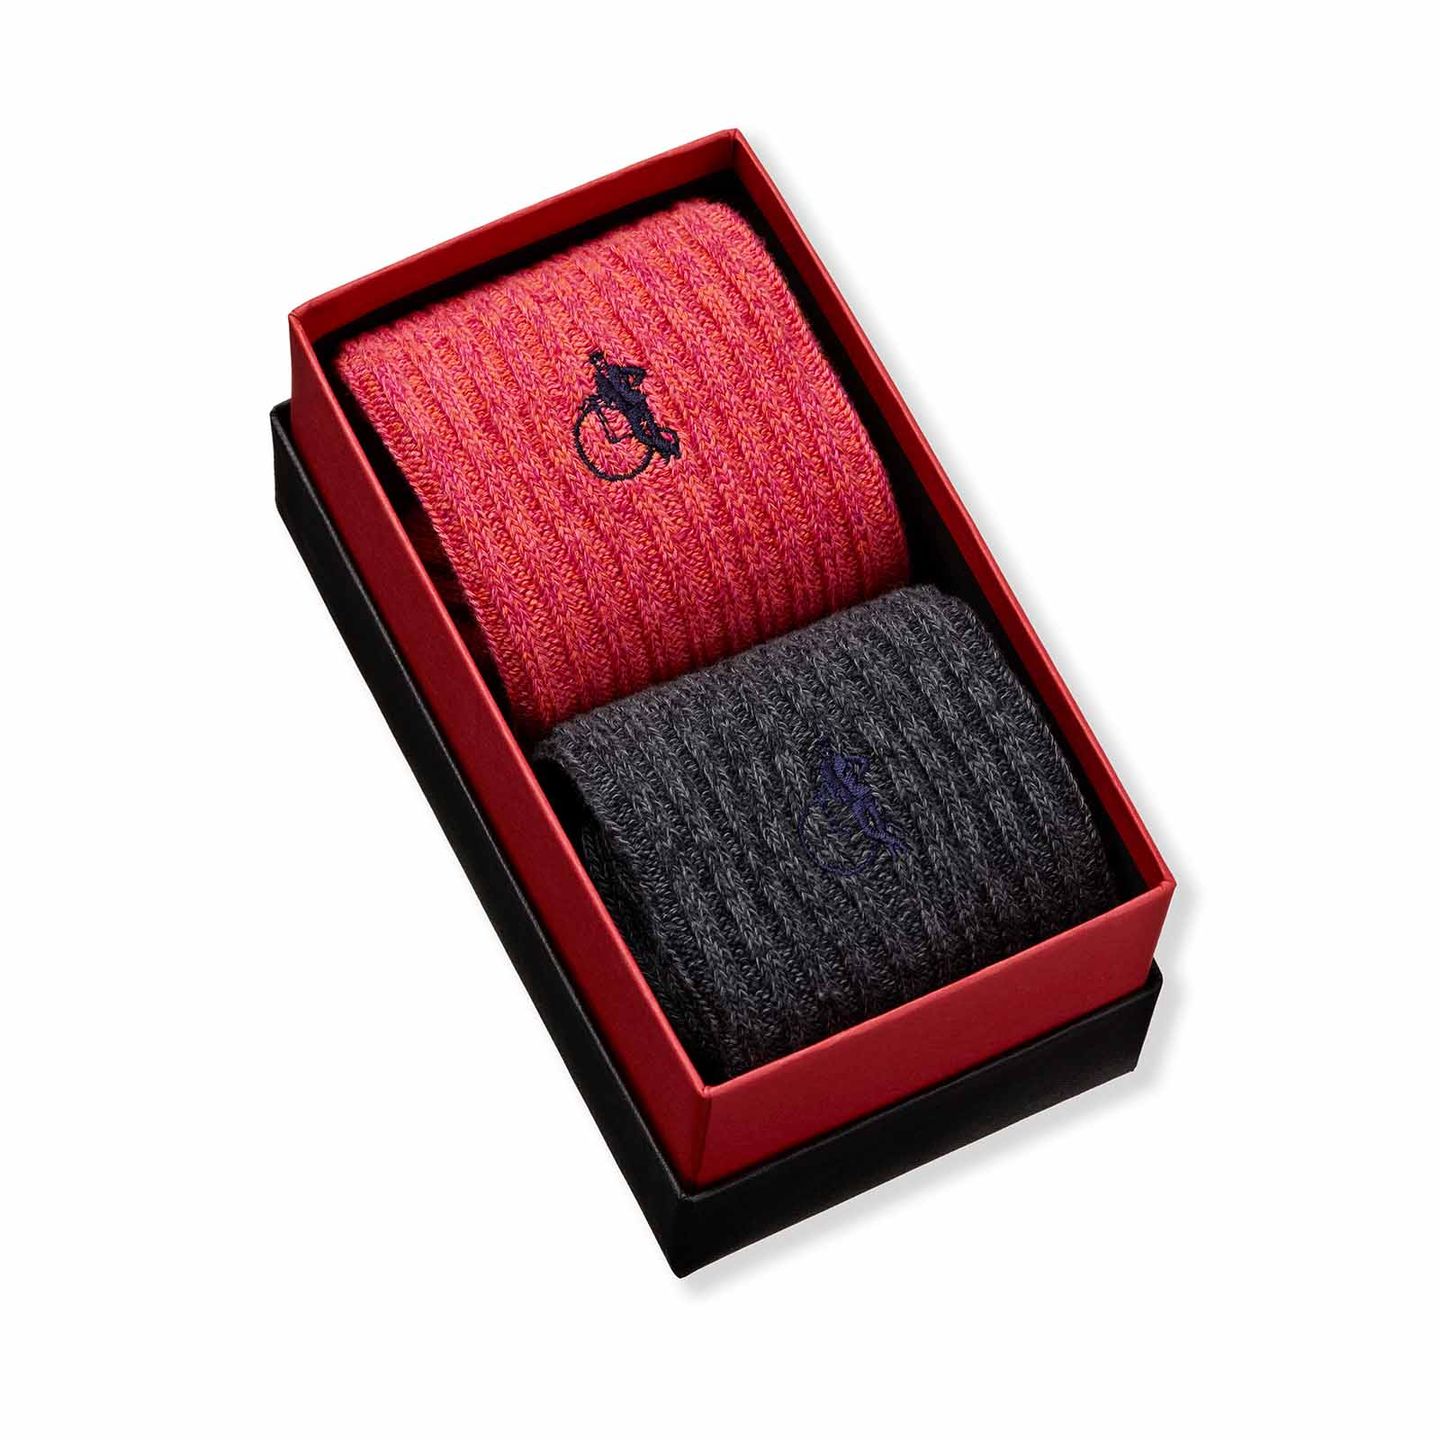 Hampstead 2 pair boot socks in red and black and in a presentation box